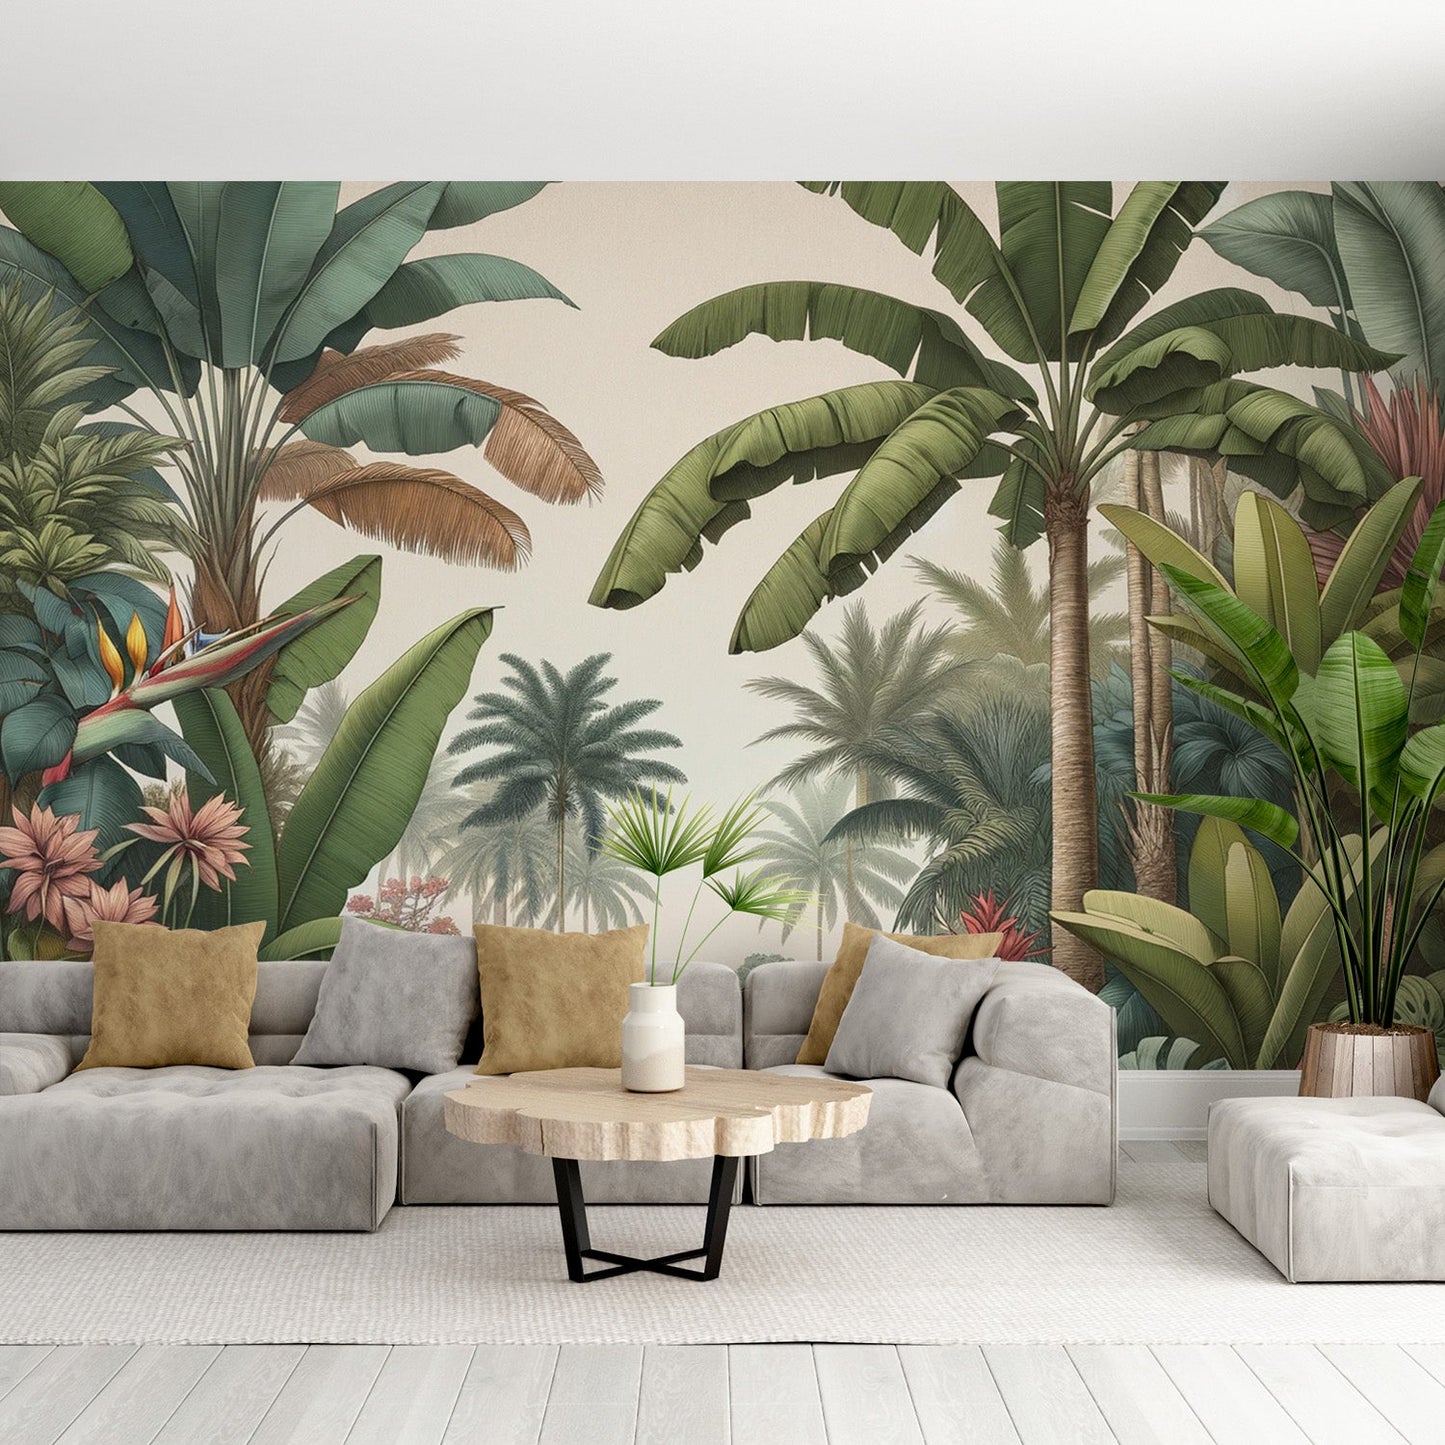 Tropical jungle wallpaper | Palm trees and banana trees on a beige background